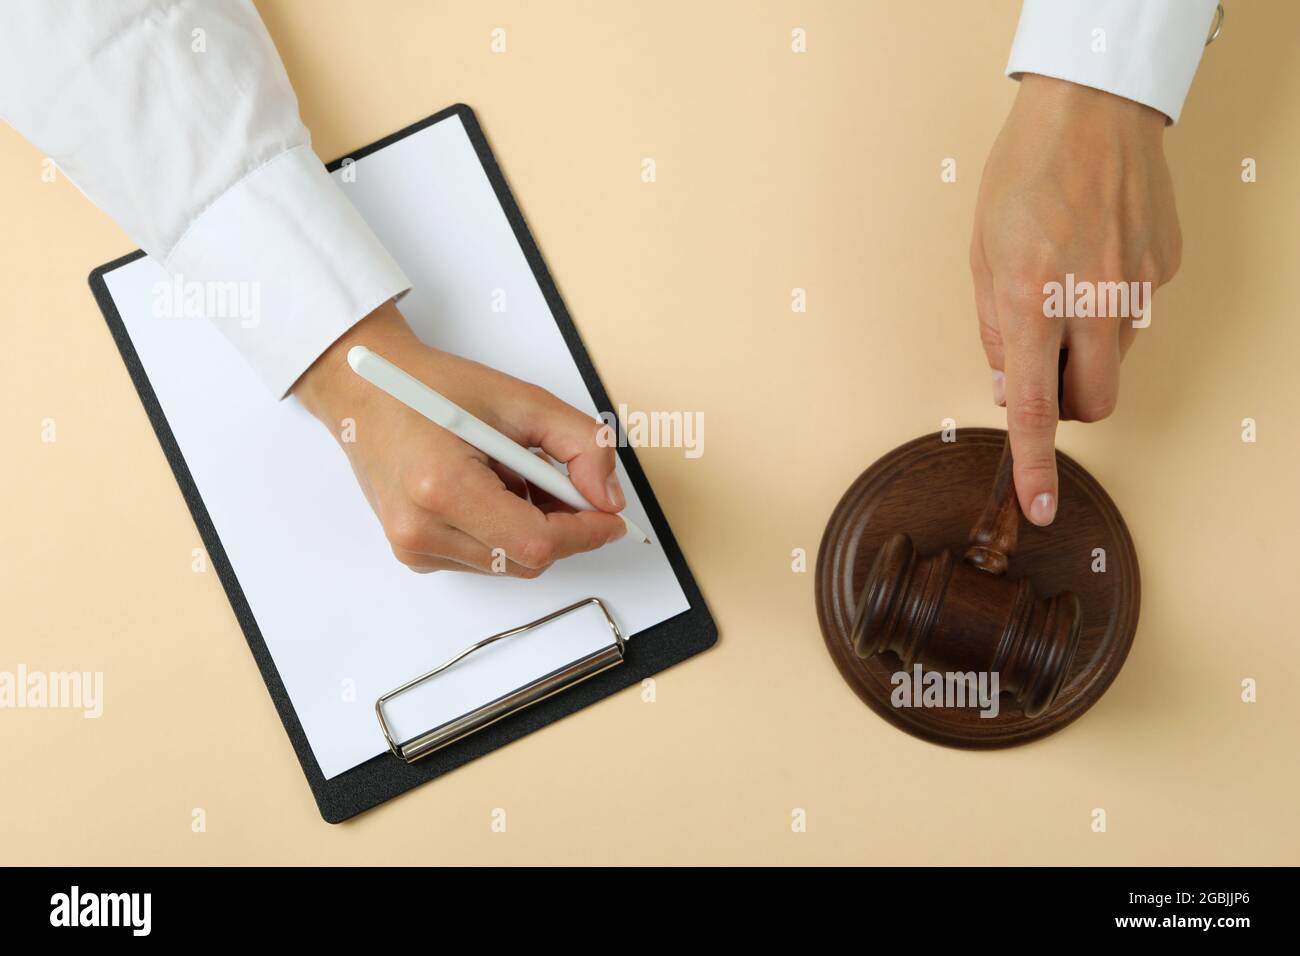 Female judge hands hold gavel and make notes in clipboard Stock Photo